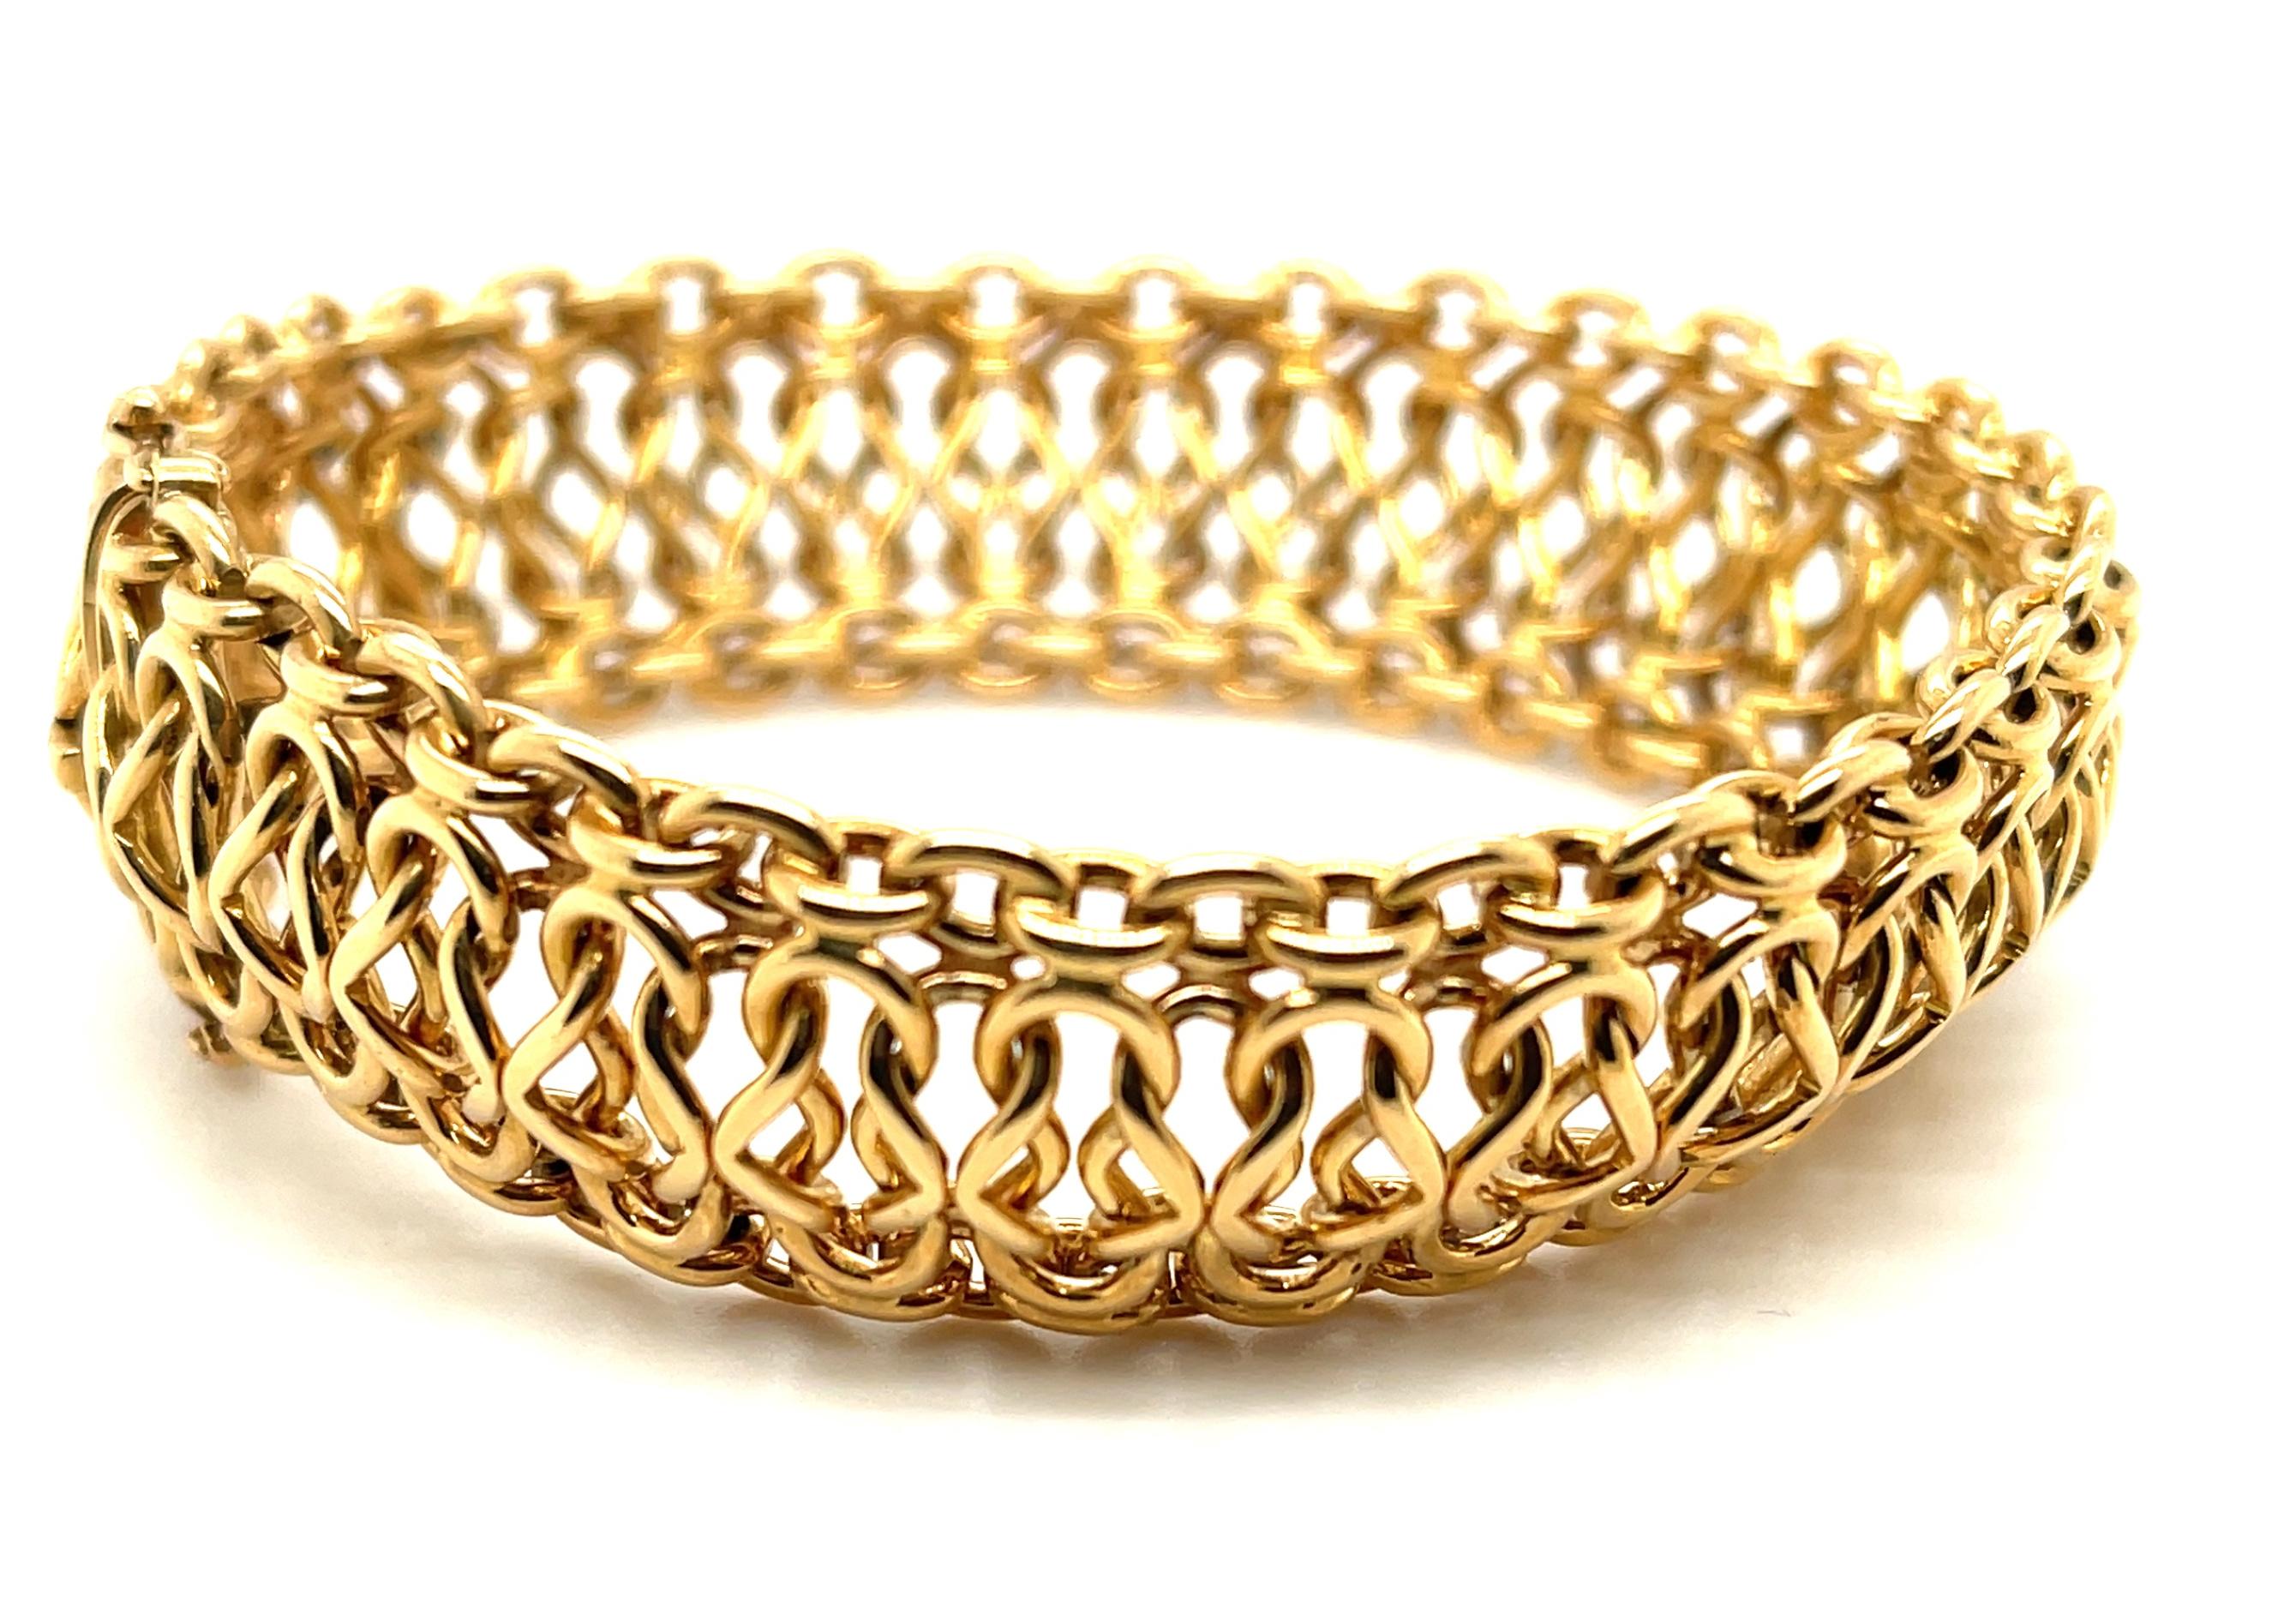 This stunning Italian gold bracelet has the look and feel of pure luxury! Beautifully interwoven links of high-polished 18k yellow gold create wonderful visual and actual movement, in an ultra-comfortable design that makes this bracelet a pleasure